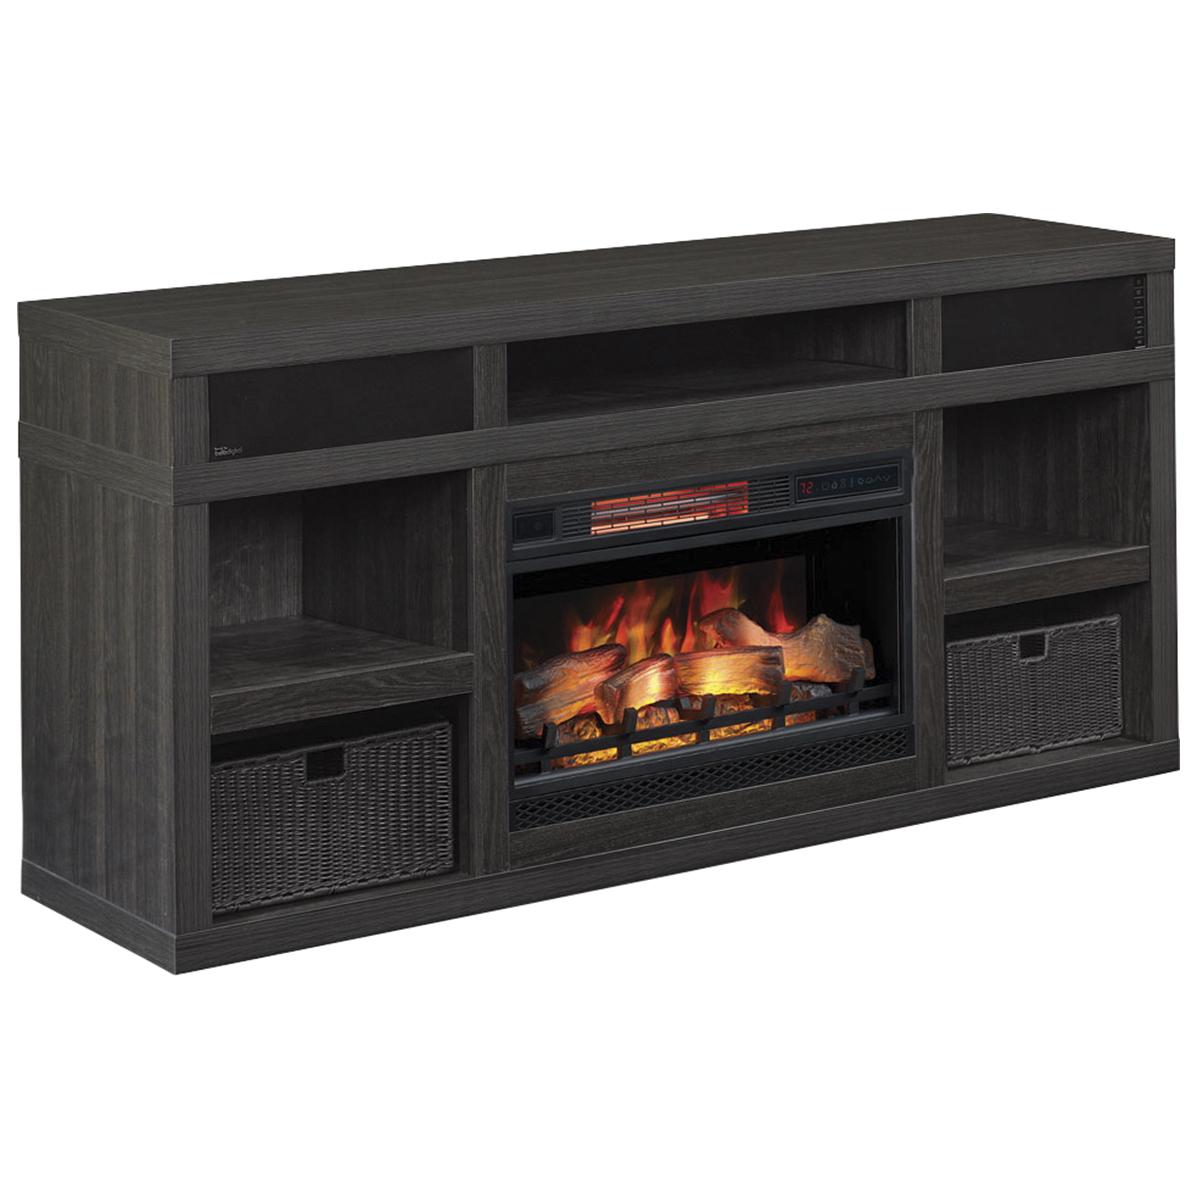 Fireplace Hearth Extension Unique Fabio Flames Greatlin 3 Piece Fireplace Entertainment Wall